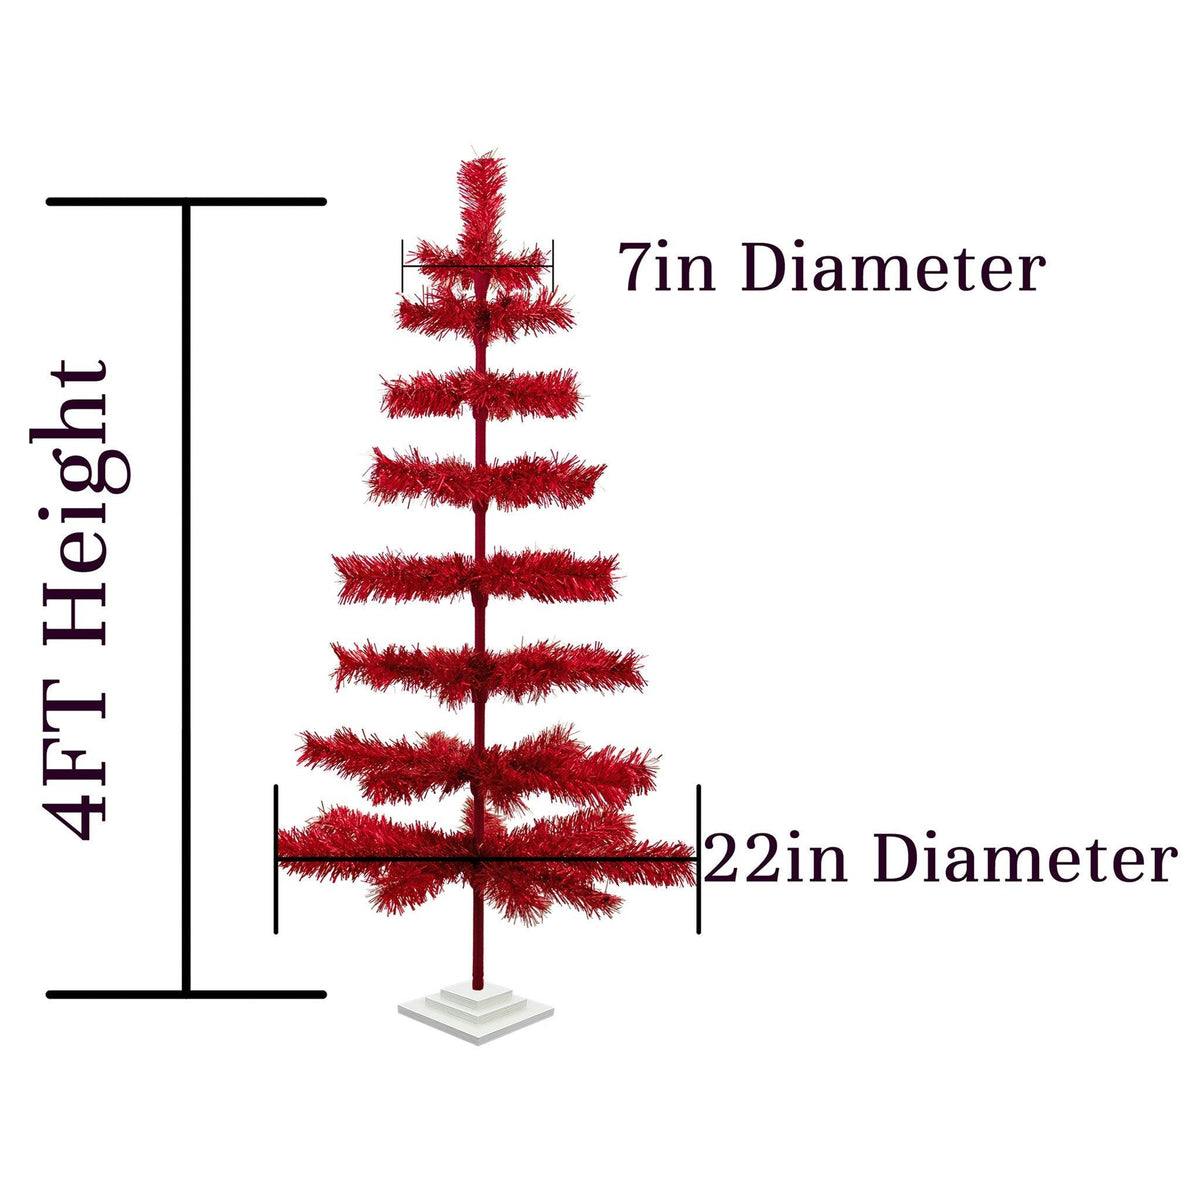 The dimensions of the 4FT tall Red Tinsel Tree sold by Lee Display